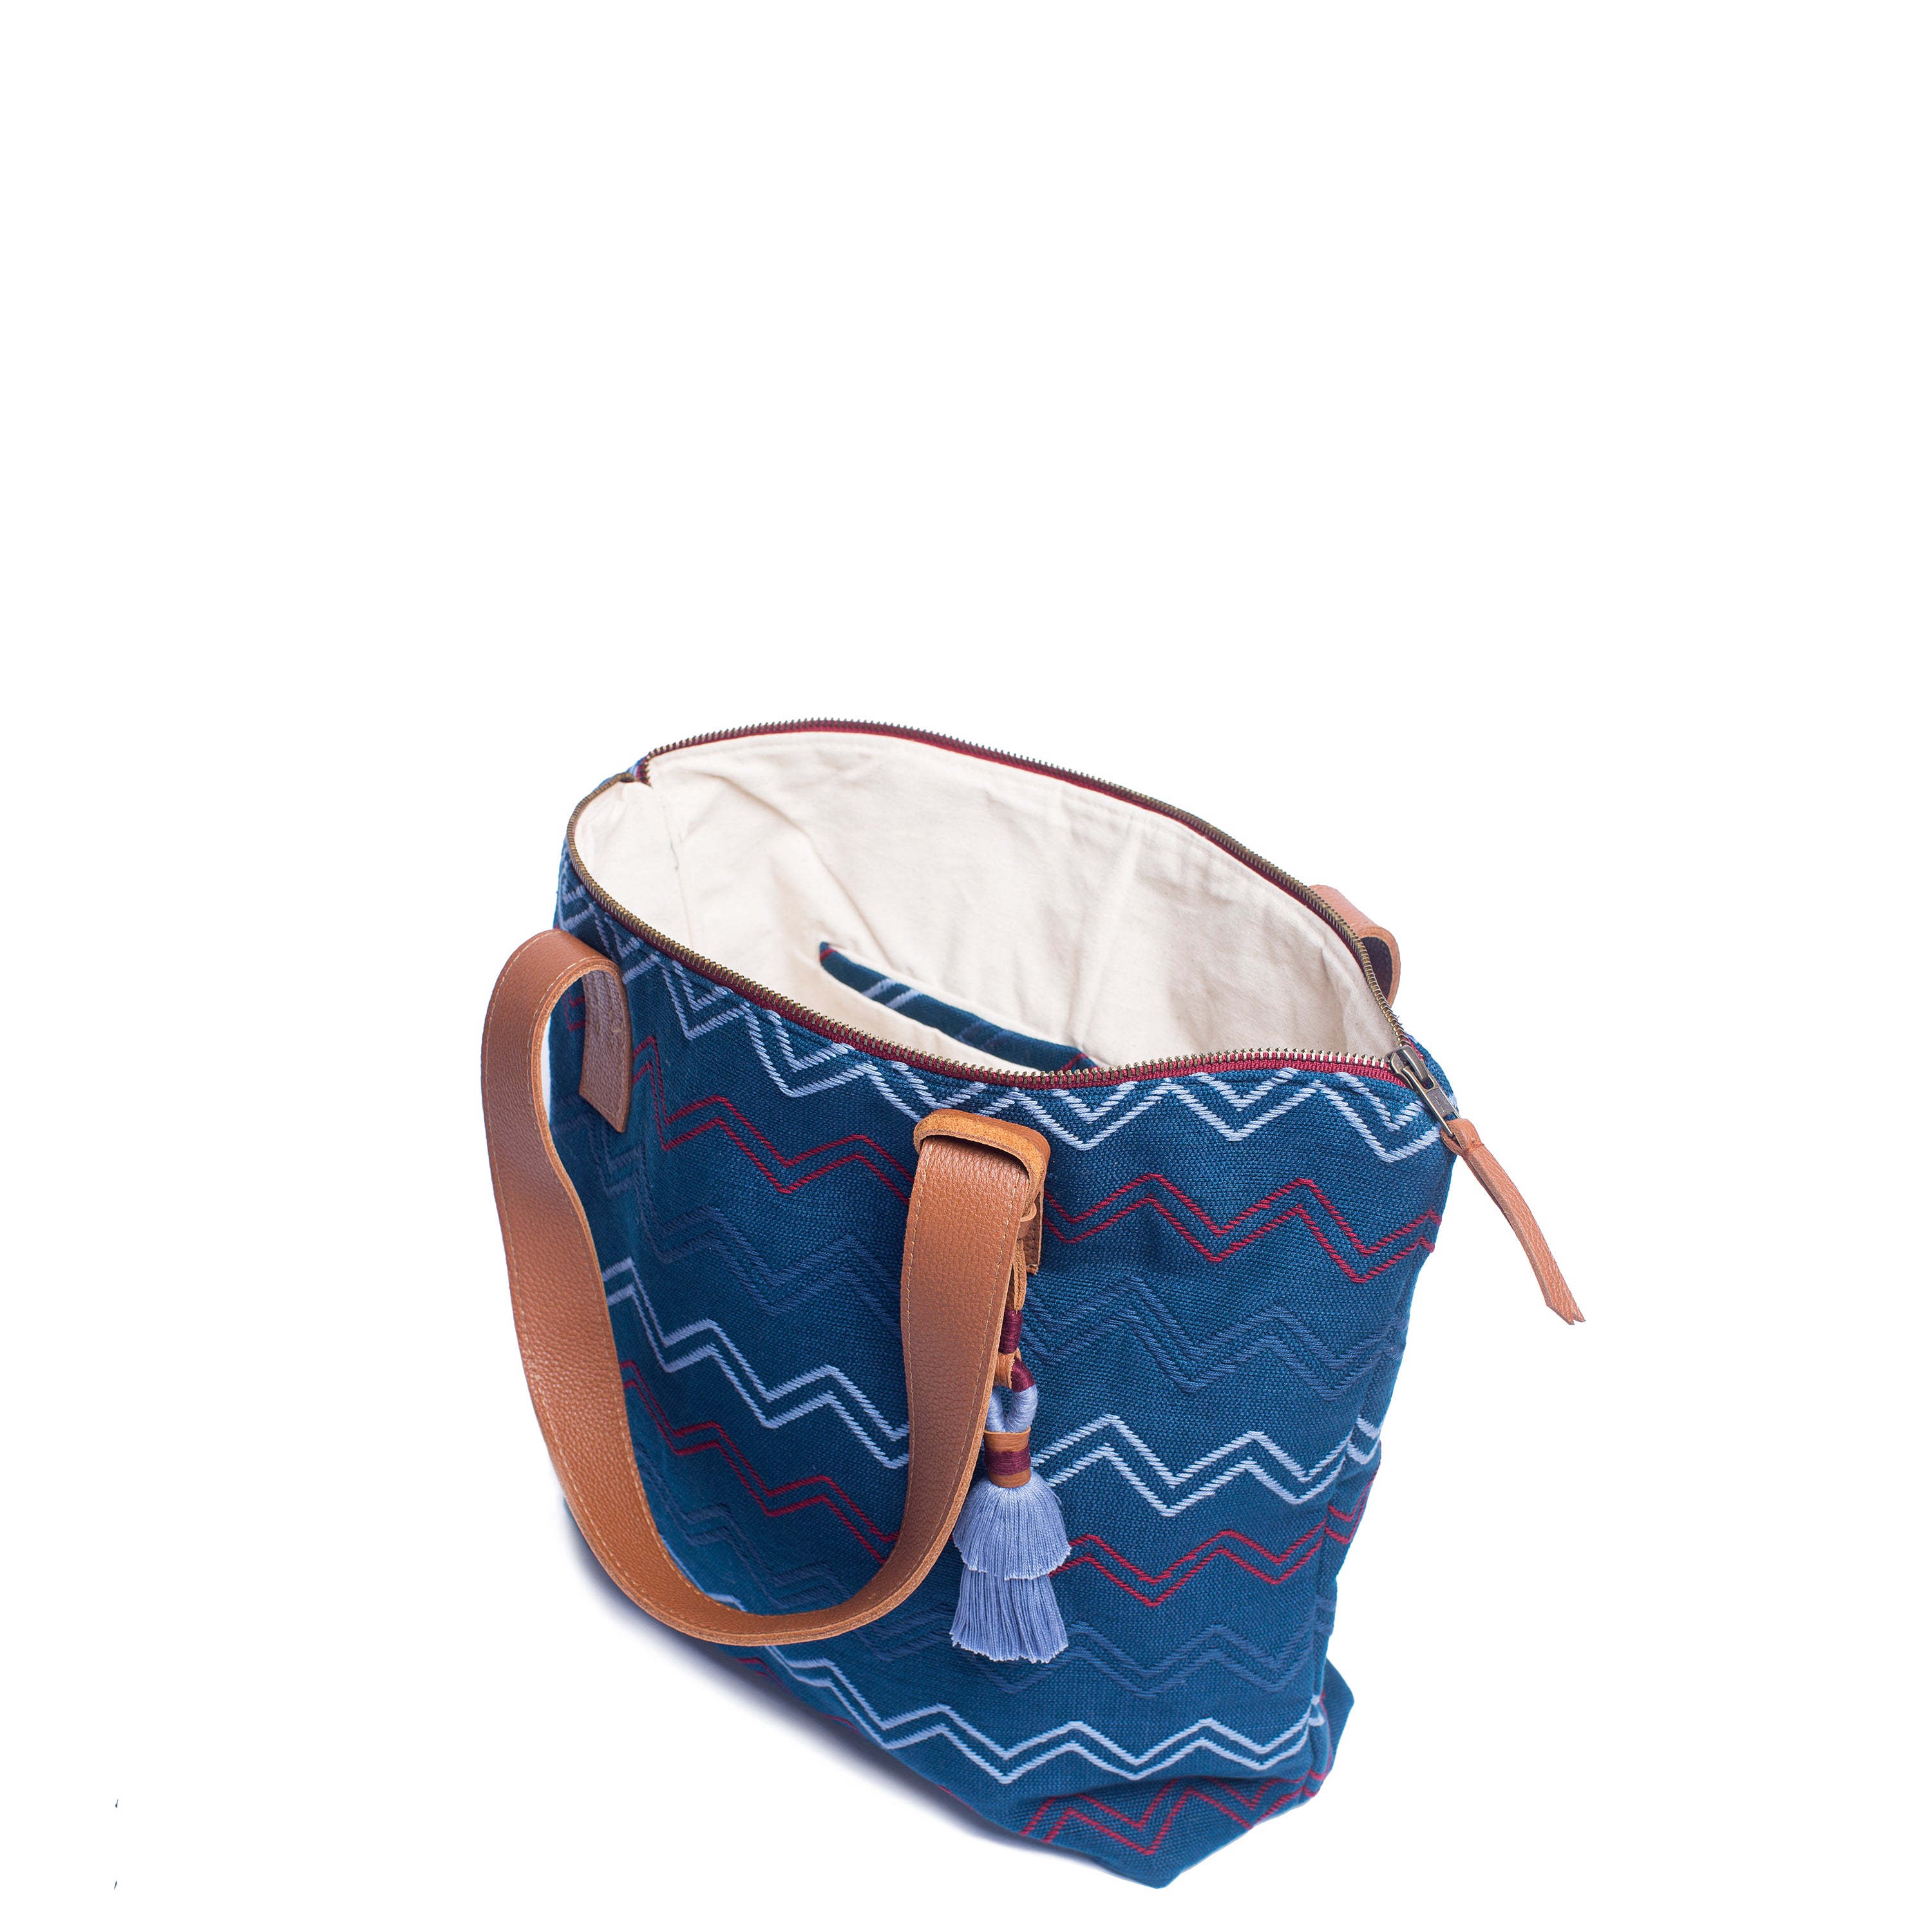 The hand woven artisan Angela Tote is unzipped and open. The interior has a white lining and blue hem. It has horizontal zigzag stripes in red, light blue, and blue over a blue background. It has a blue tassel and leather handles. 